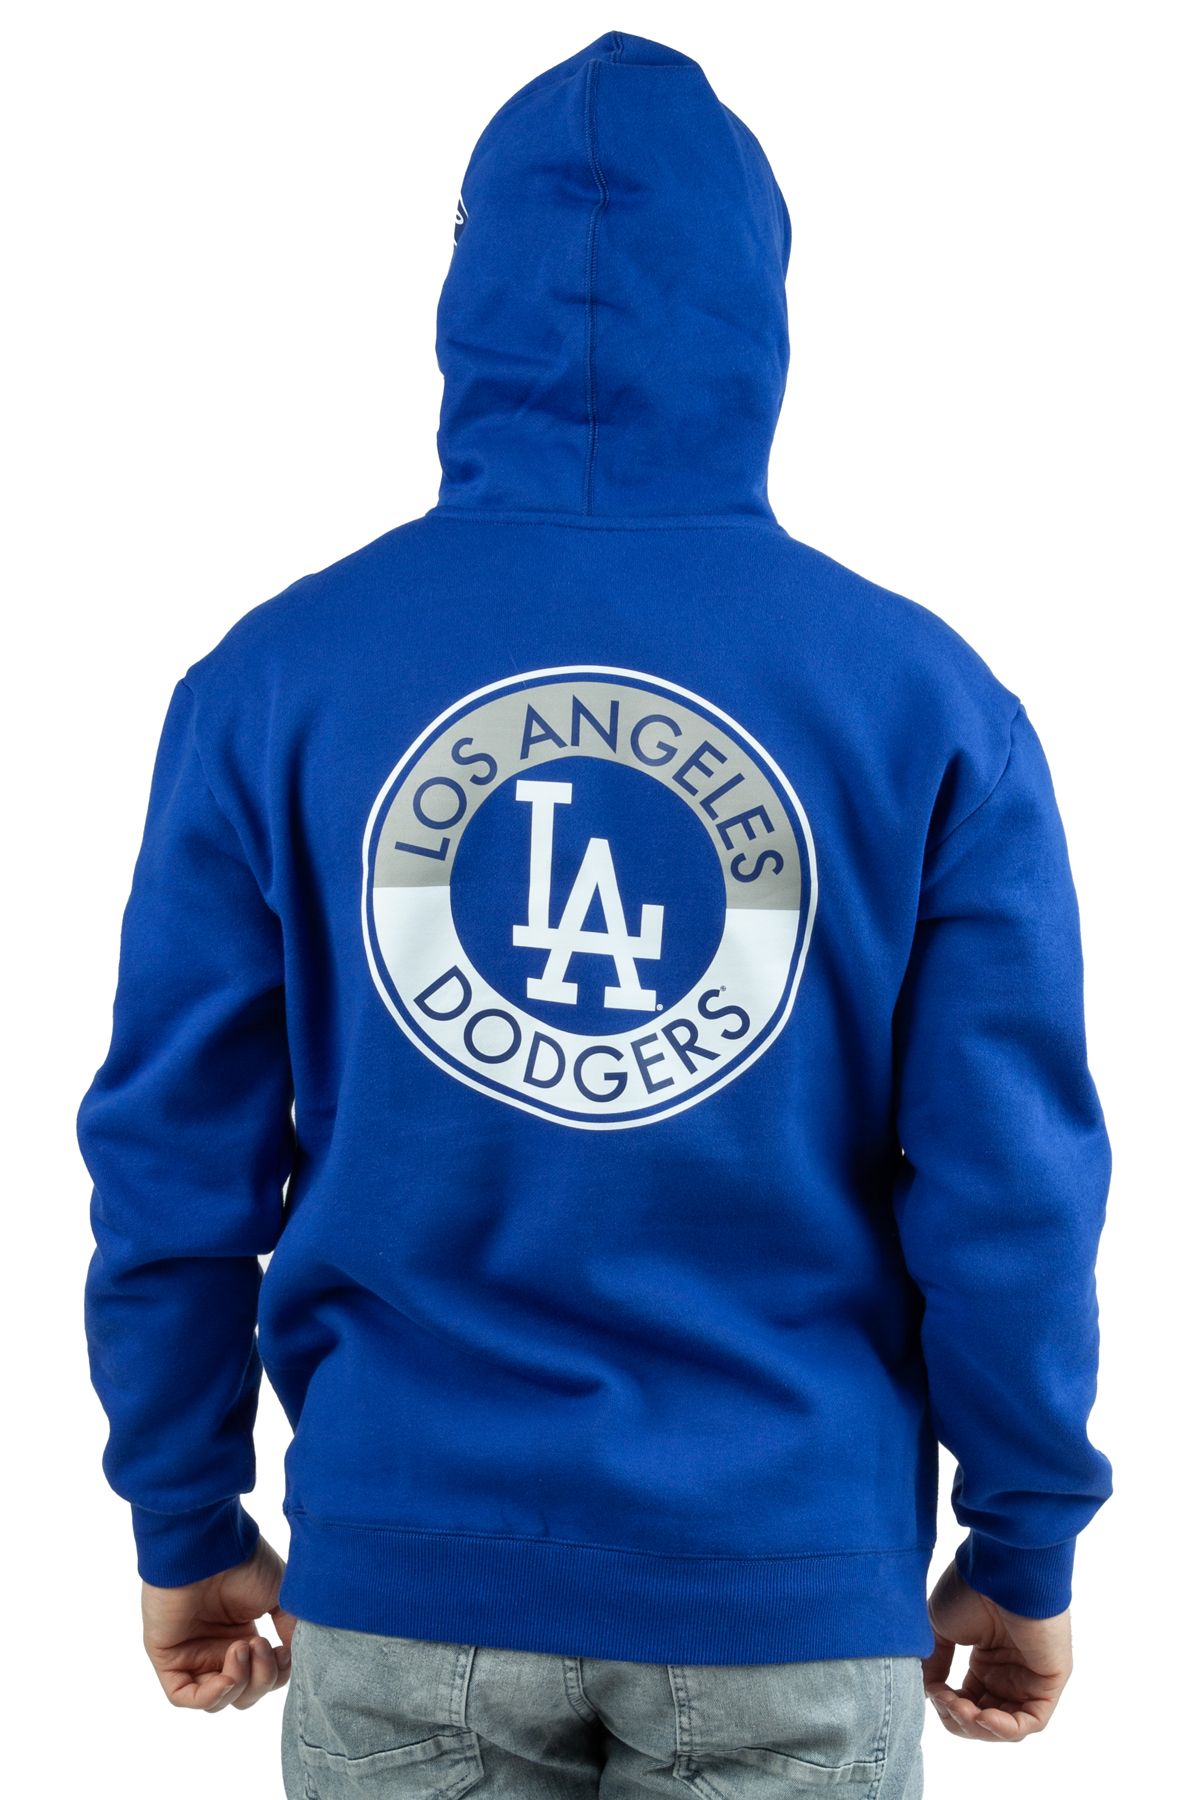 MITCHELL & NESS LOS ANGELES DODGERS HOODIE FPHD4987-LADYYPPPROYA